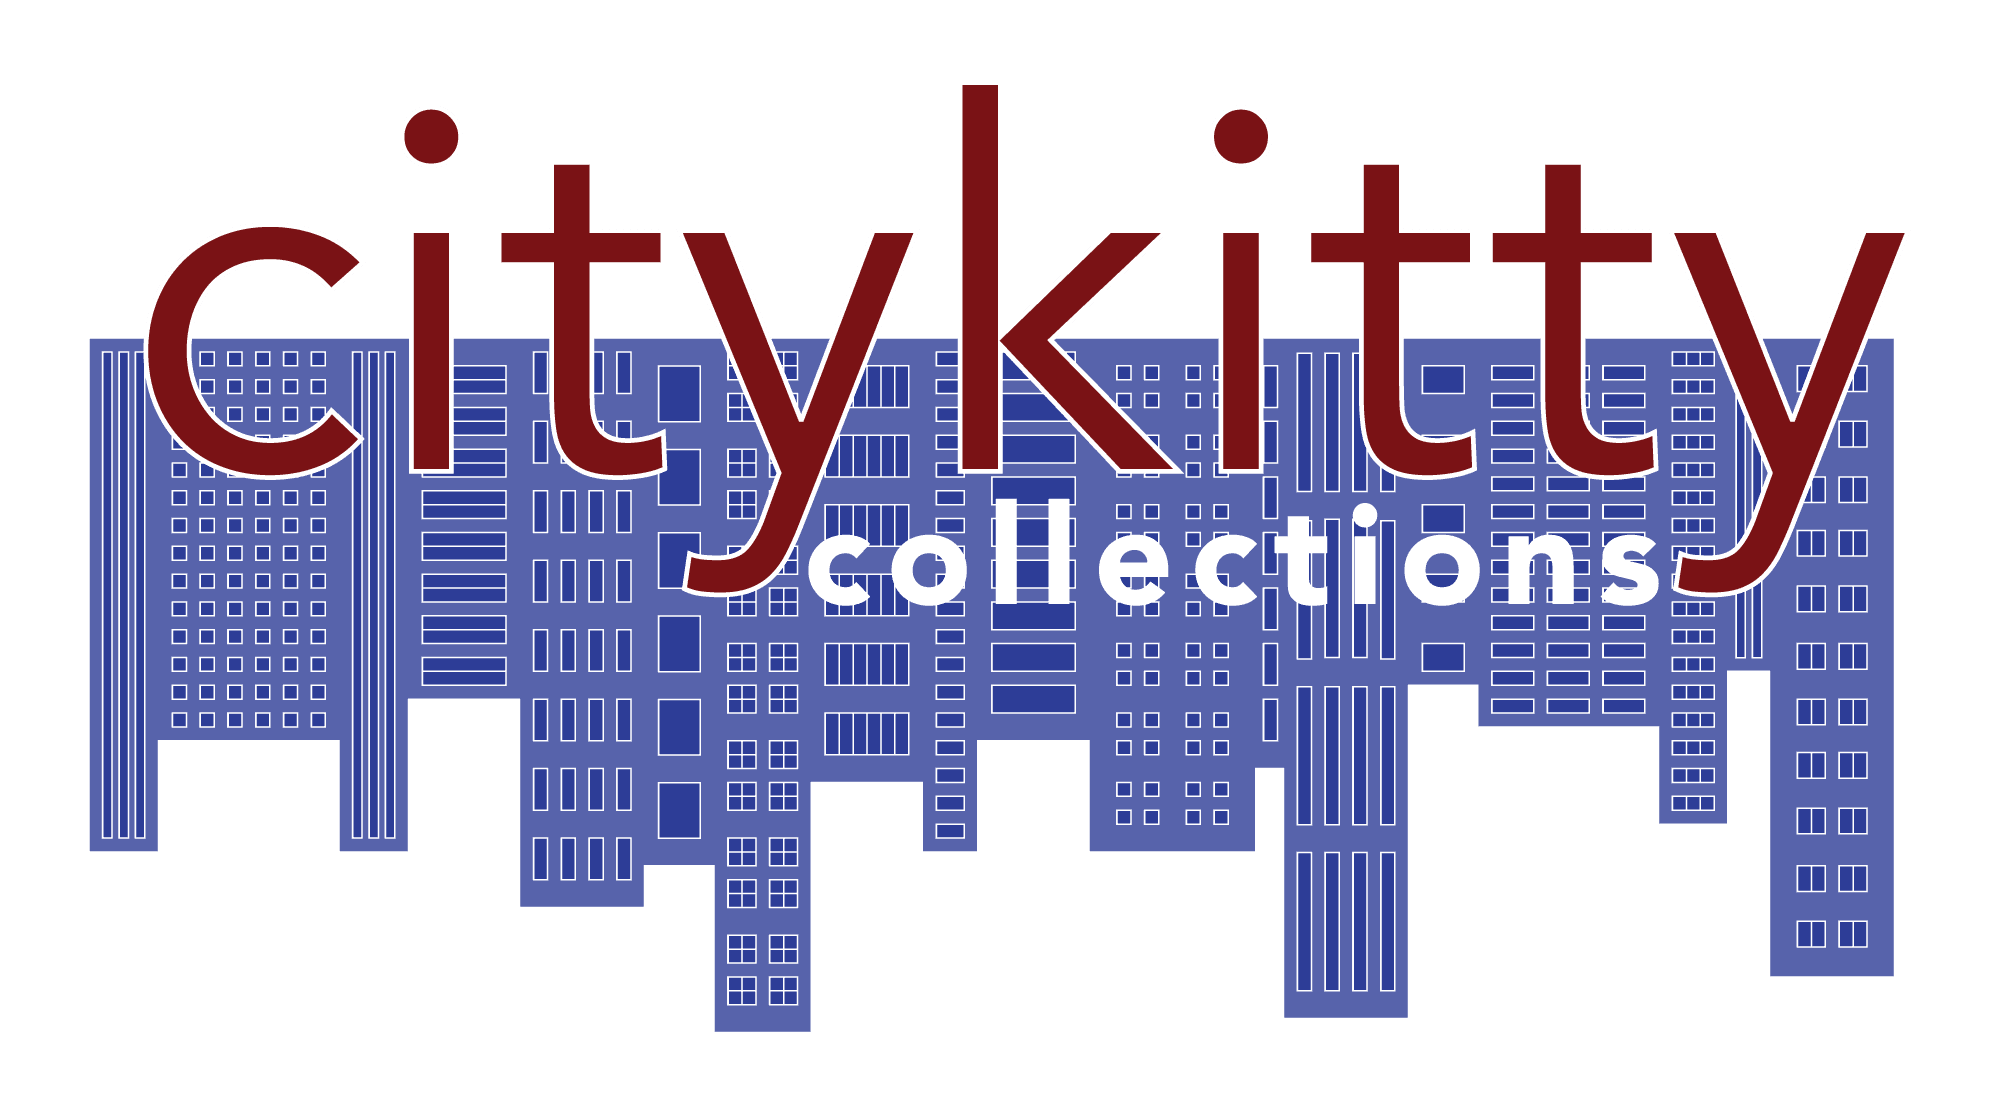 City Kitty Collections